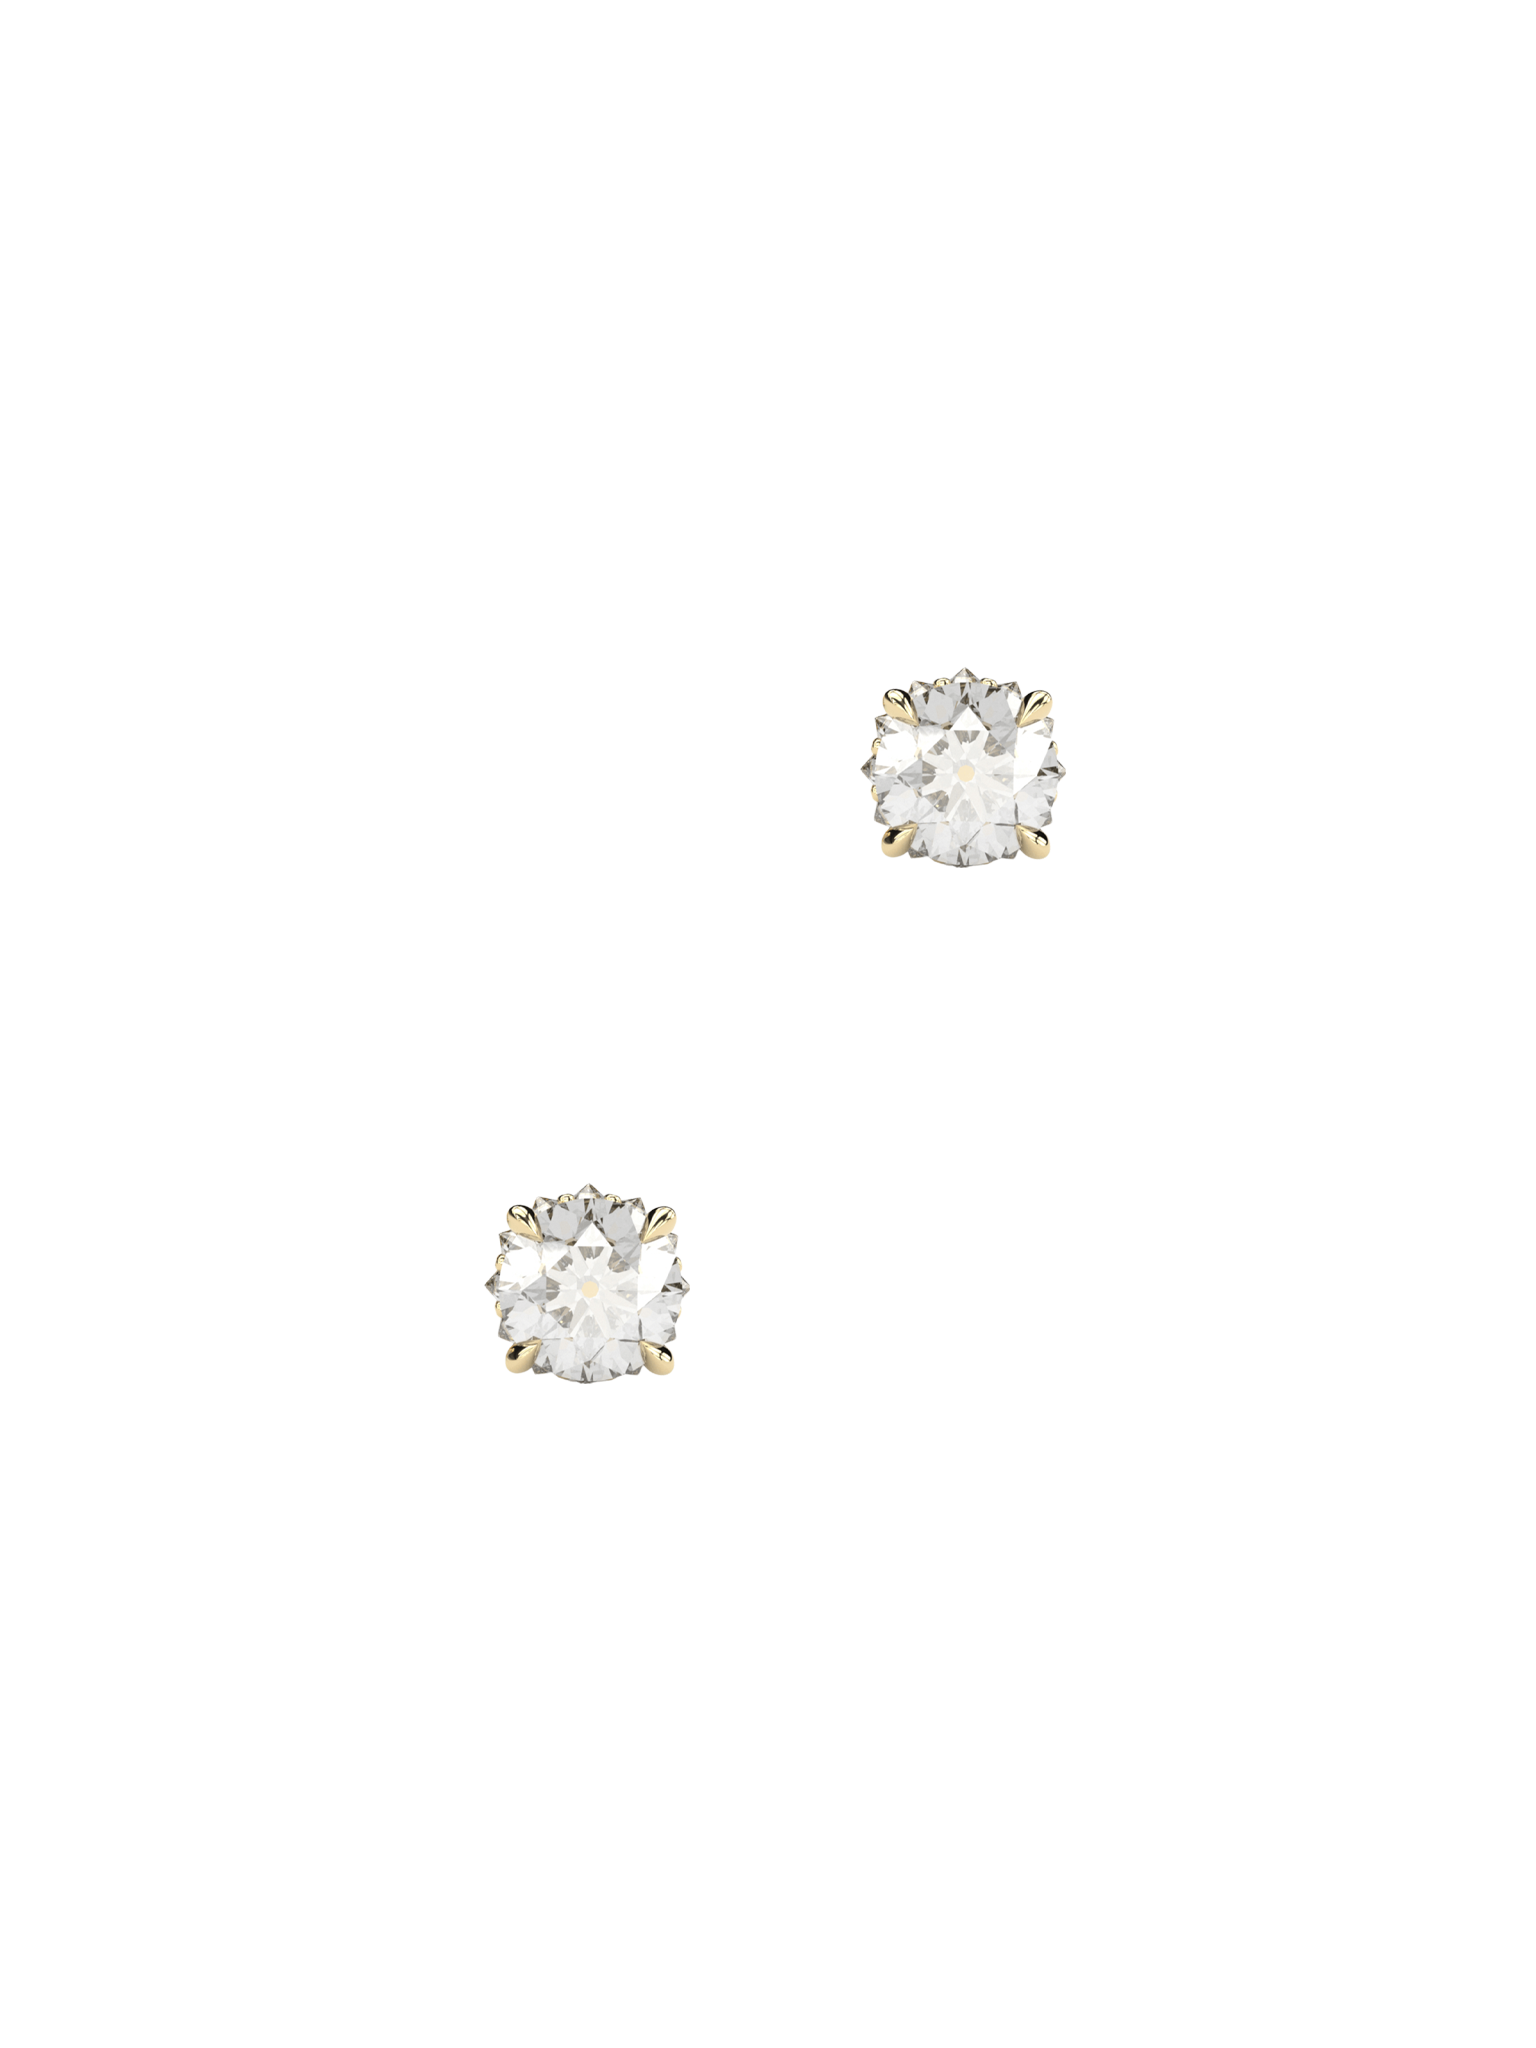 Cosmos solar earrings - studs, ~1,10 ct total, yellow